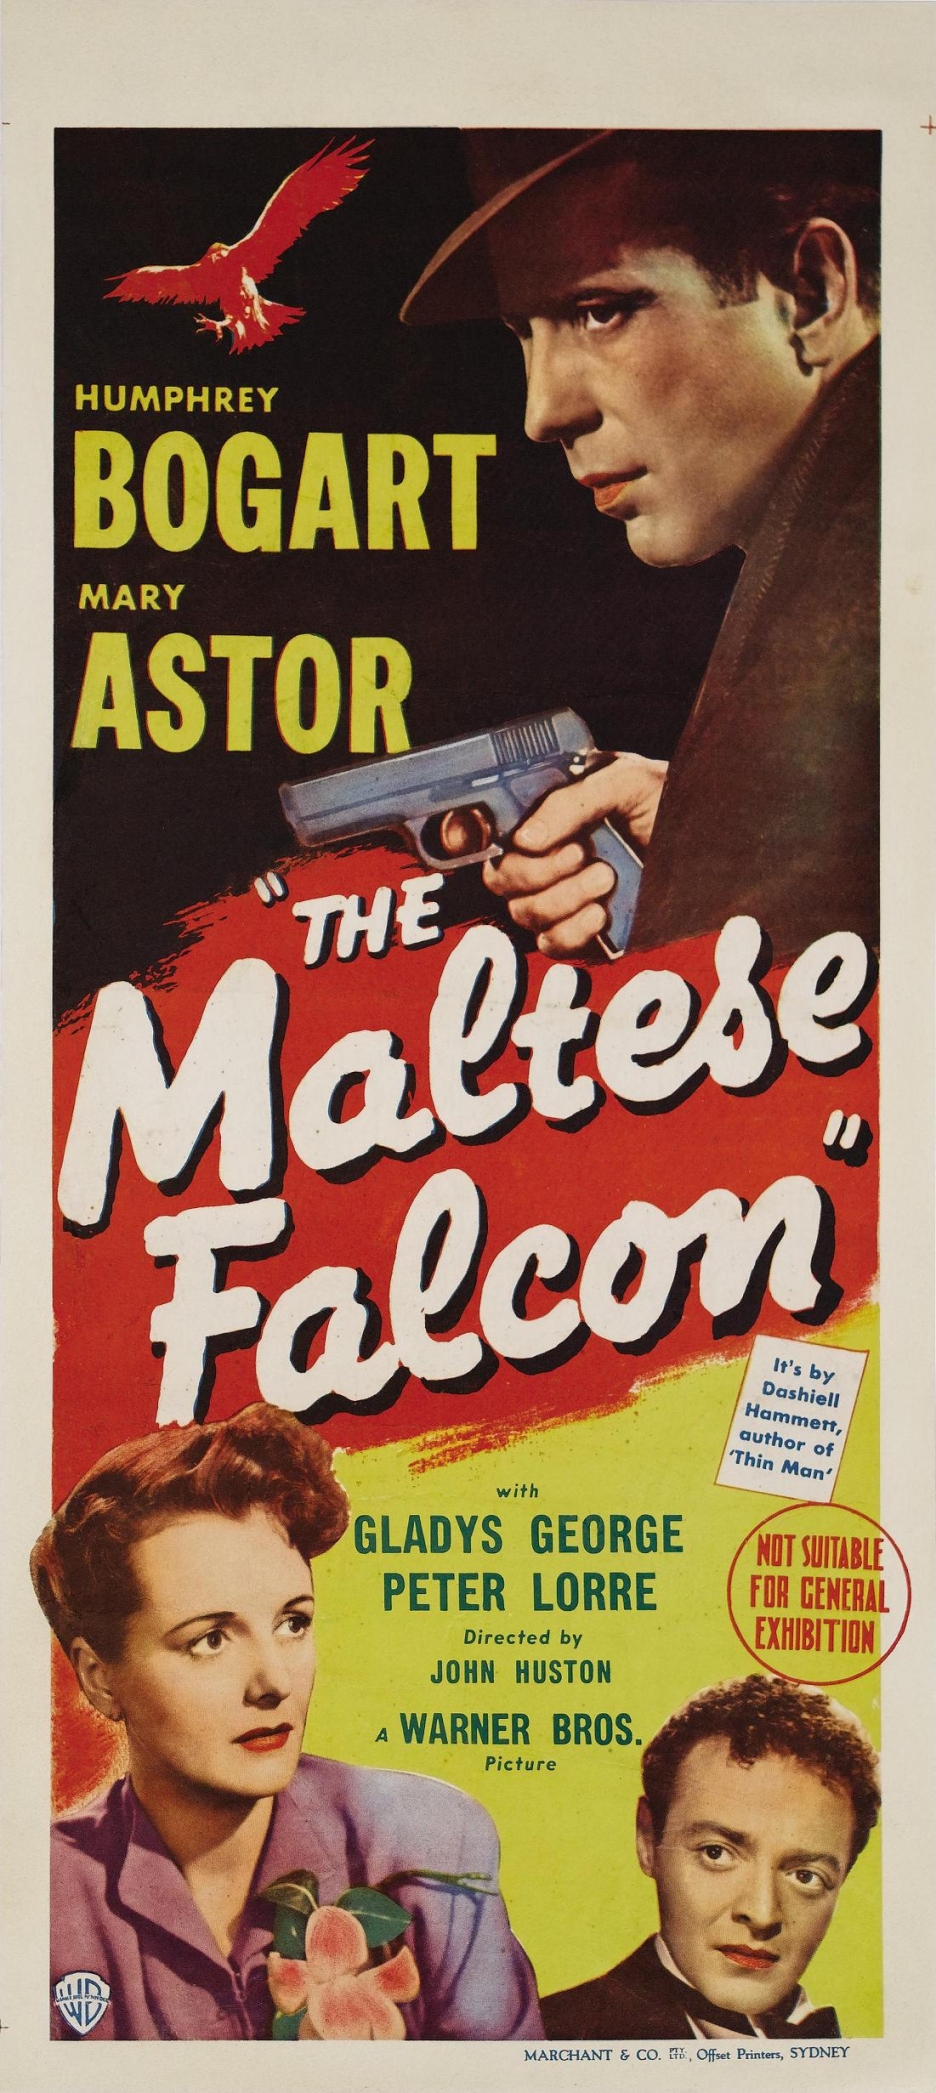 The Maltese Falcon film poster starring Humphrey Bogart and Mary Astor